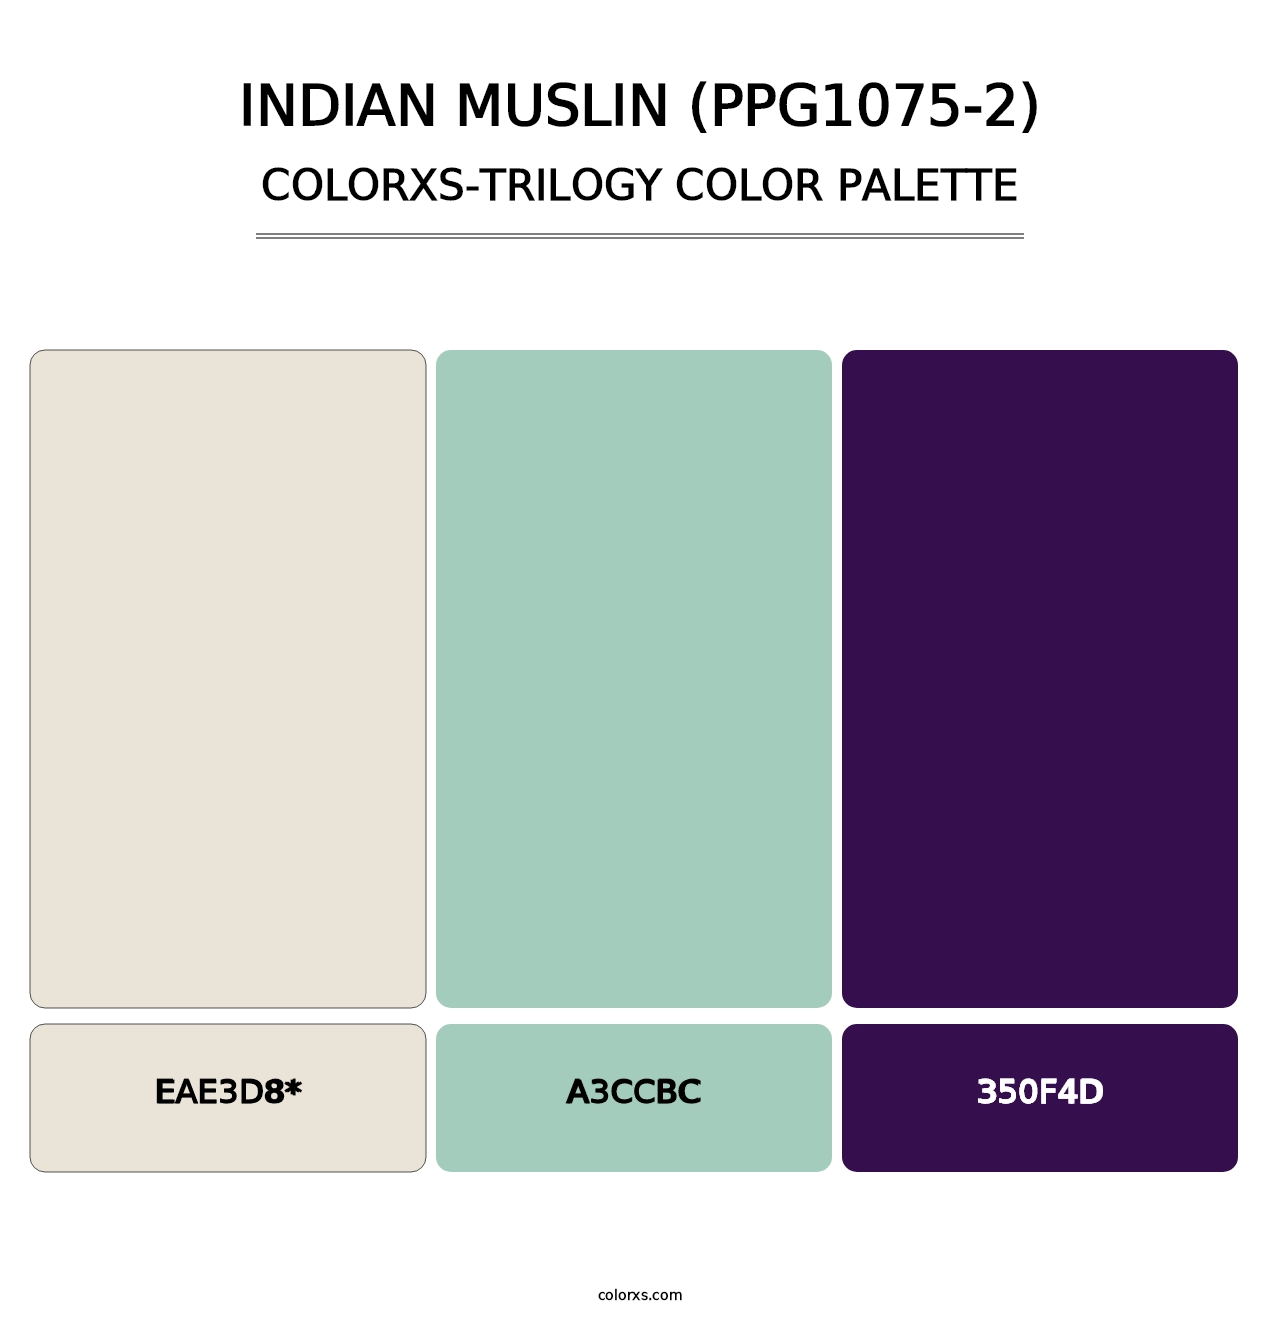 Indian Muslin (PPG1075-2) - Colorxs Trilogy Palette